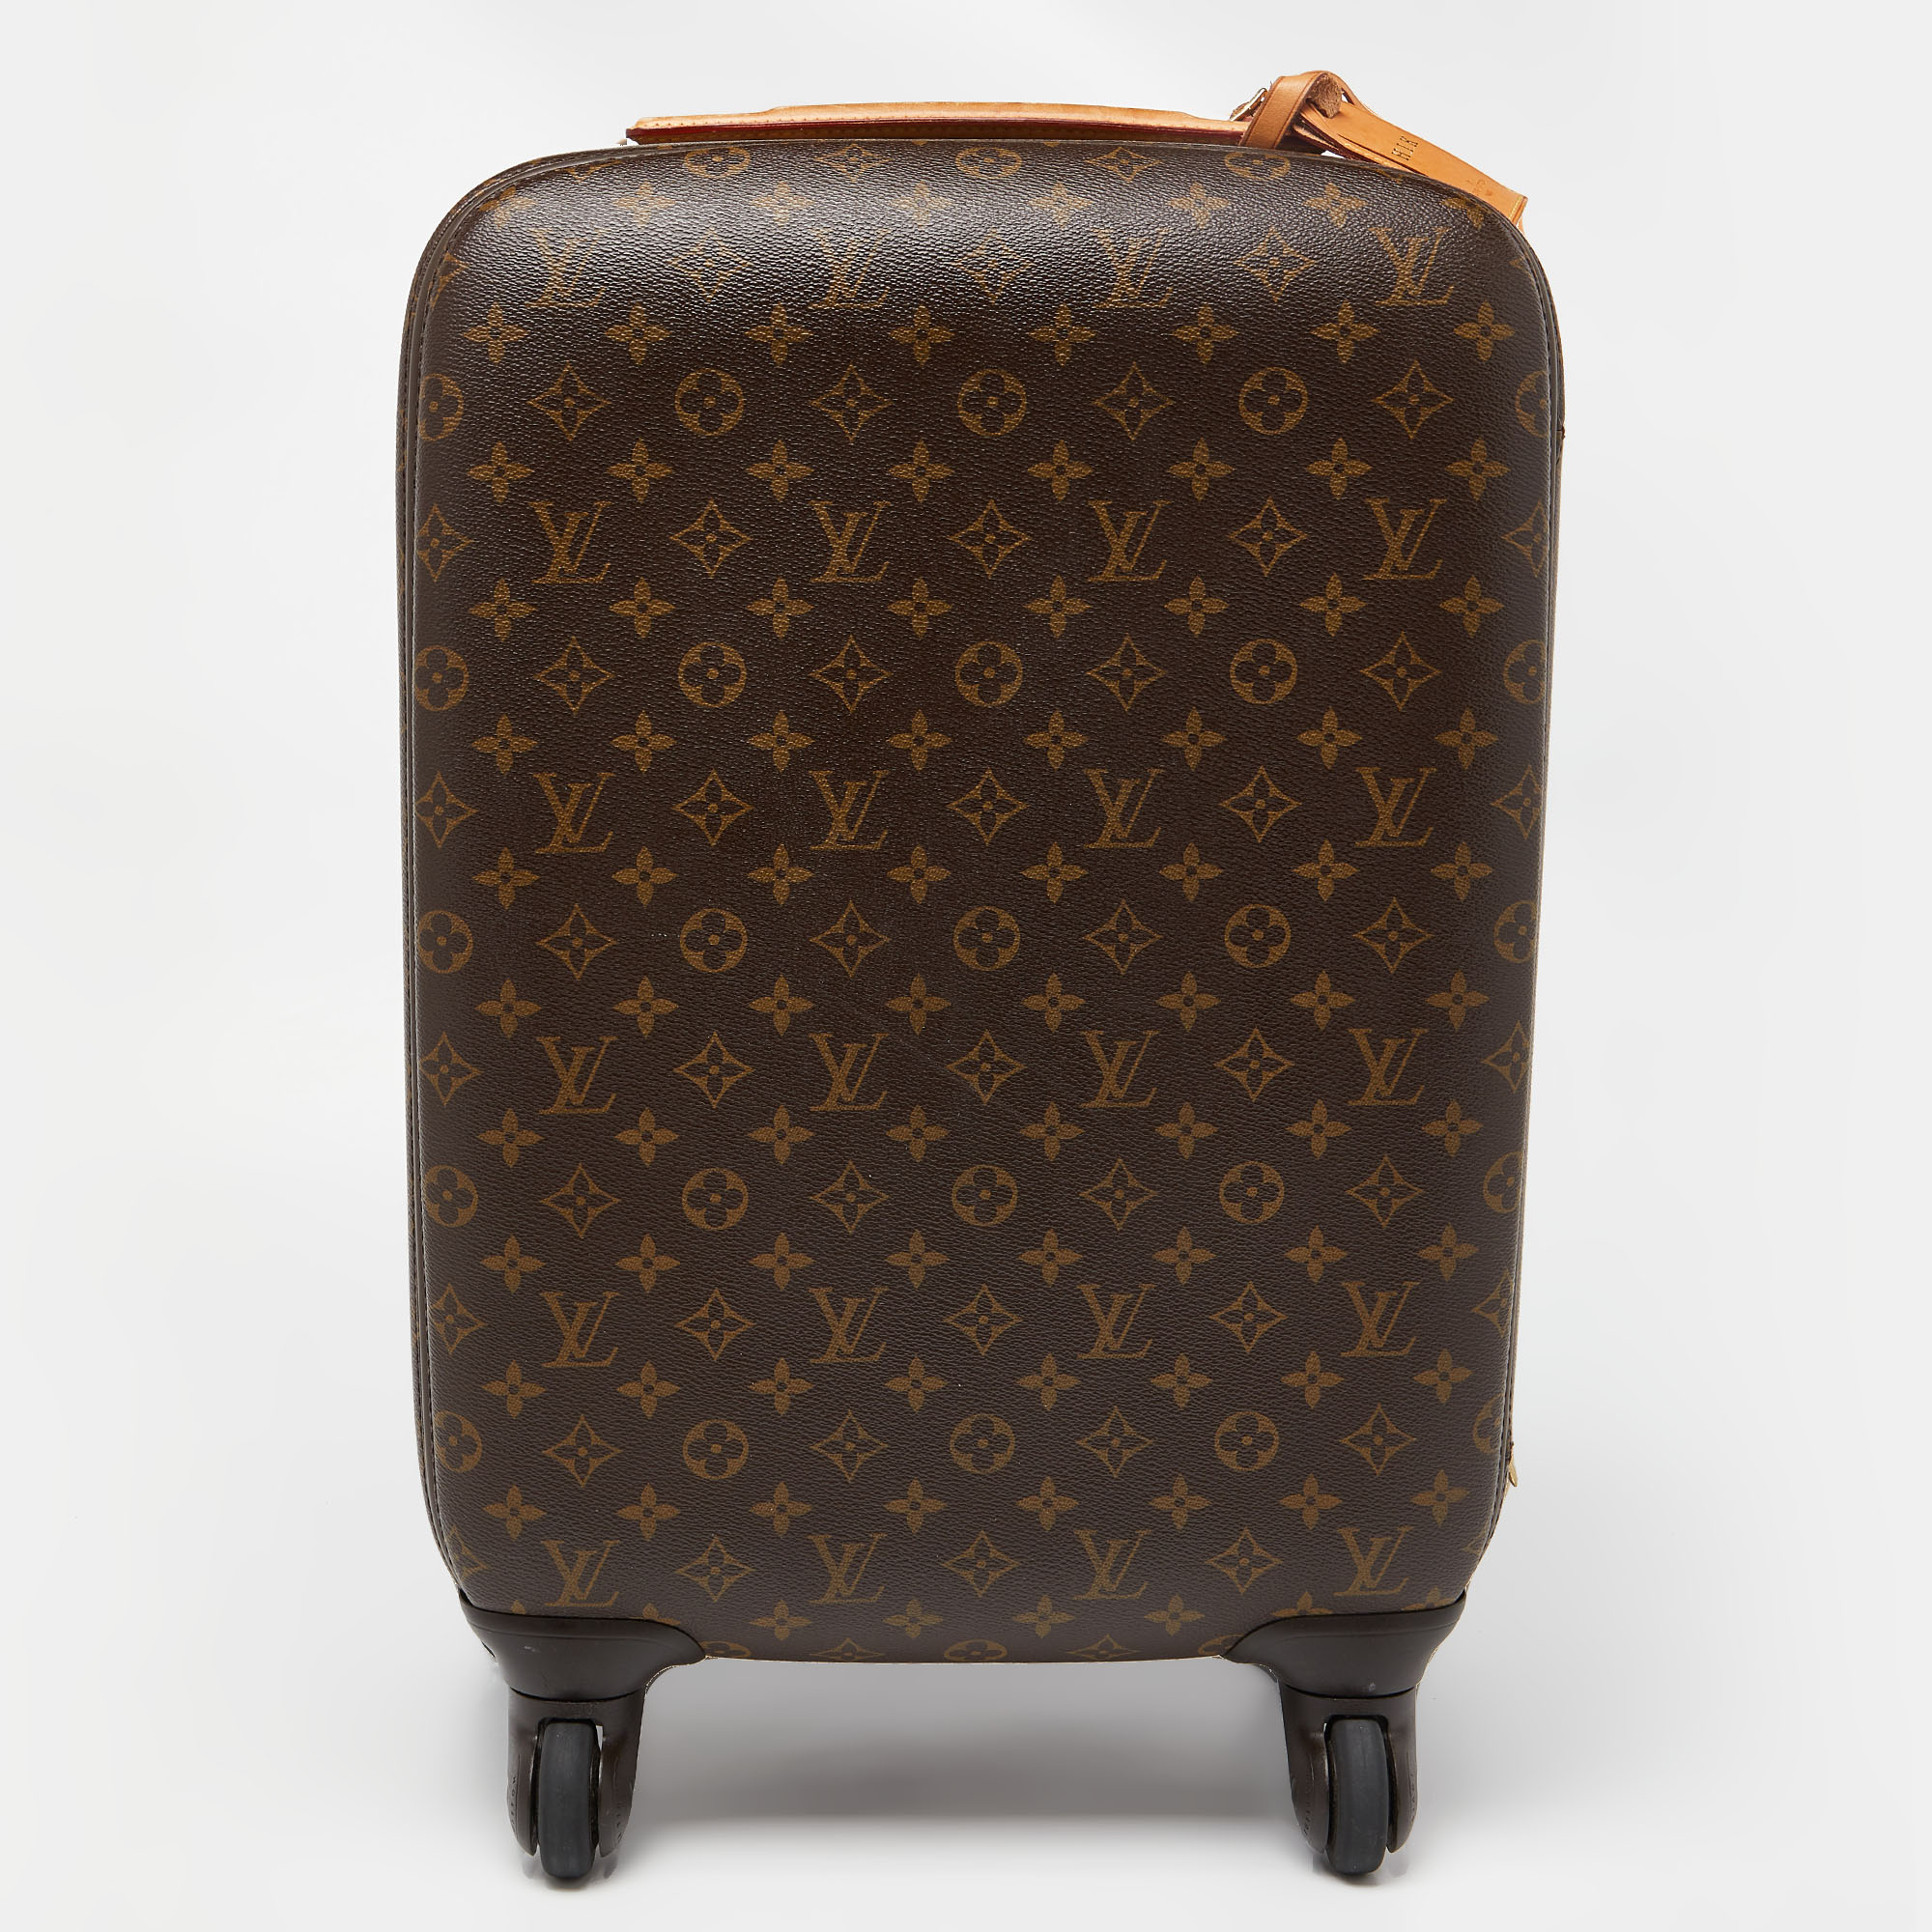 Women's Louis Vuitton Luggage and suitcases from $998